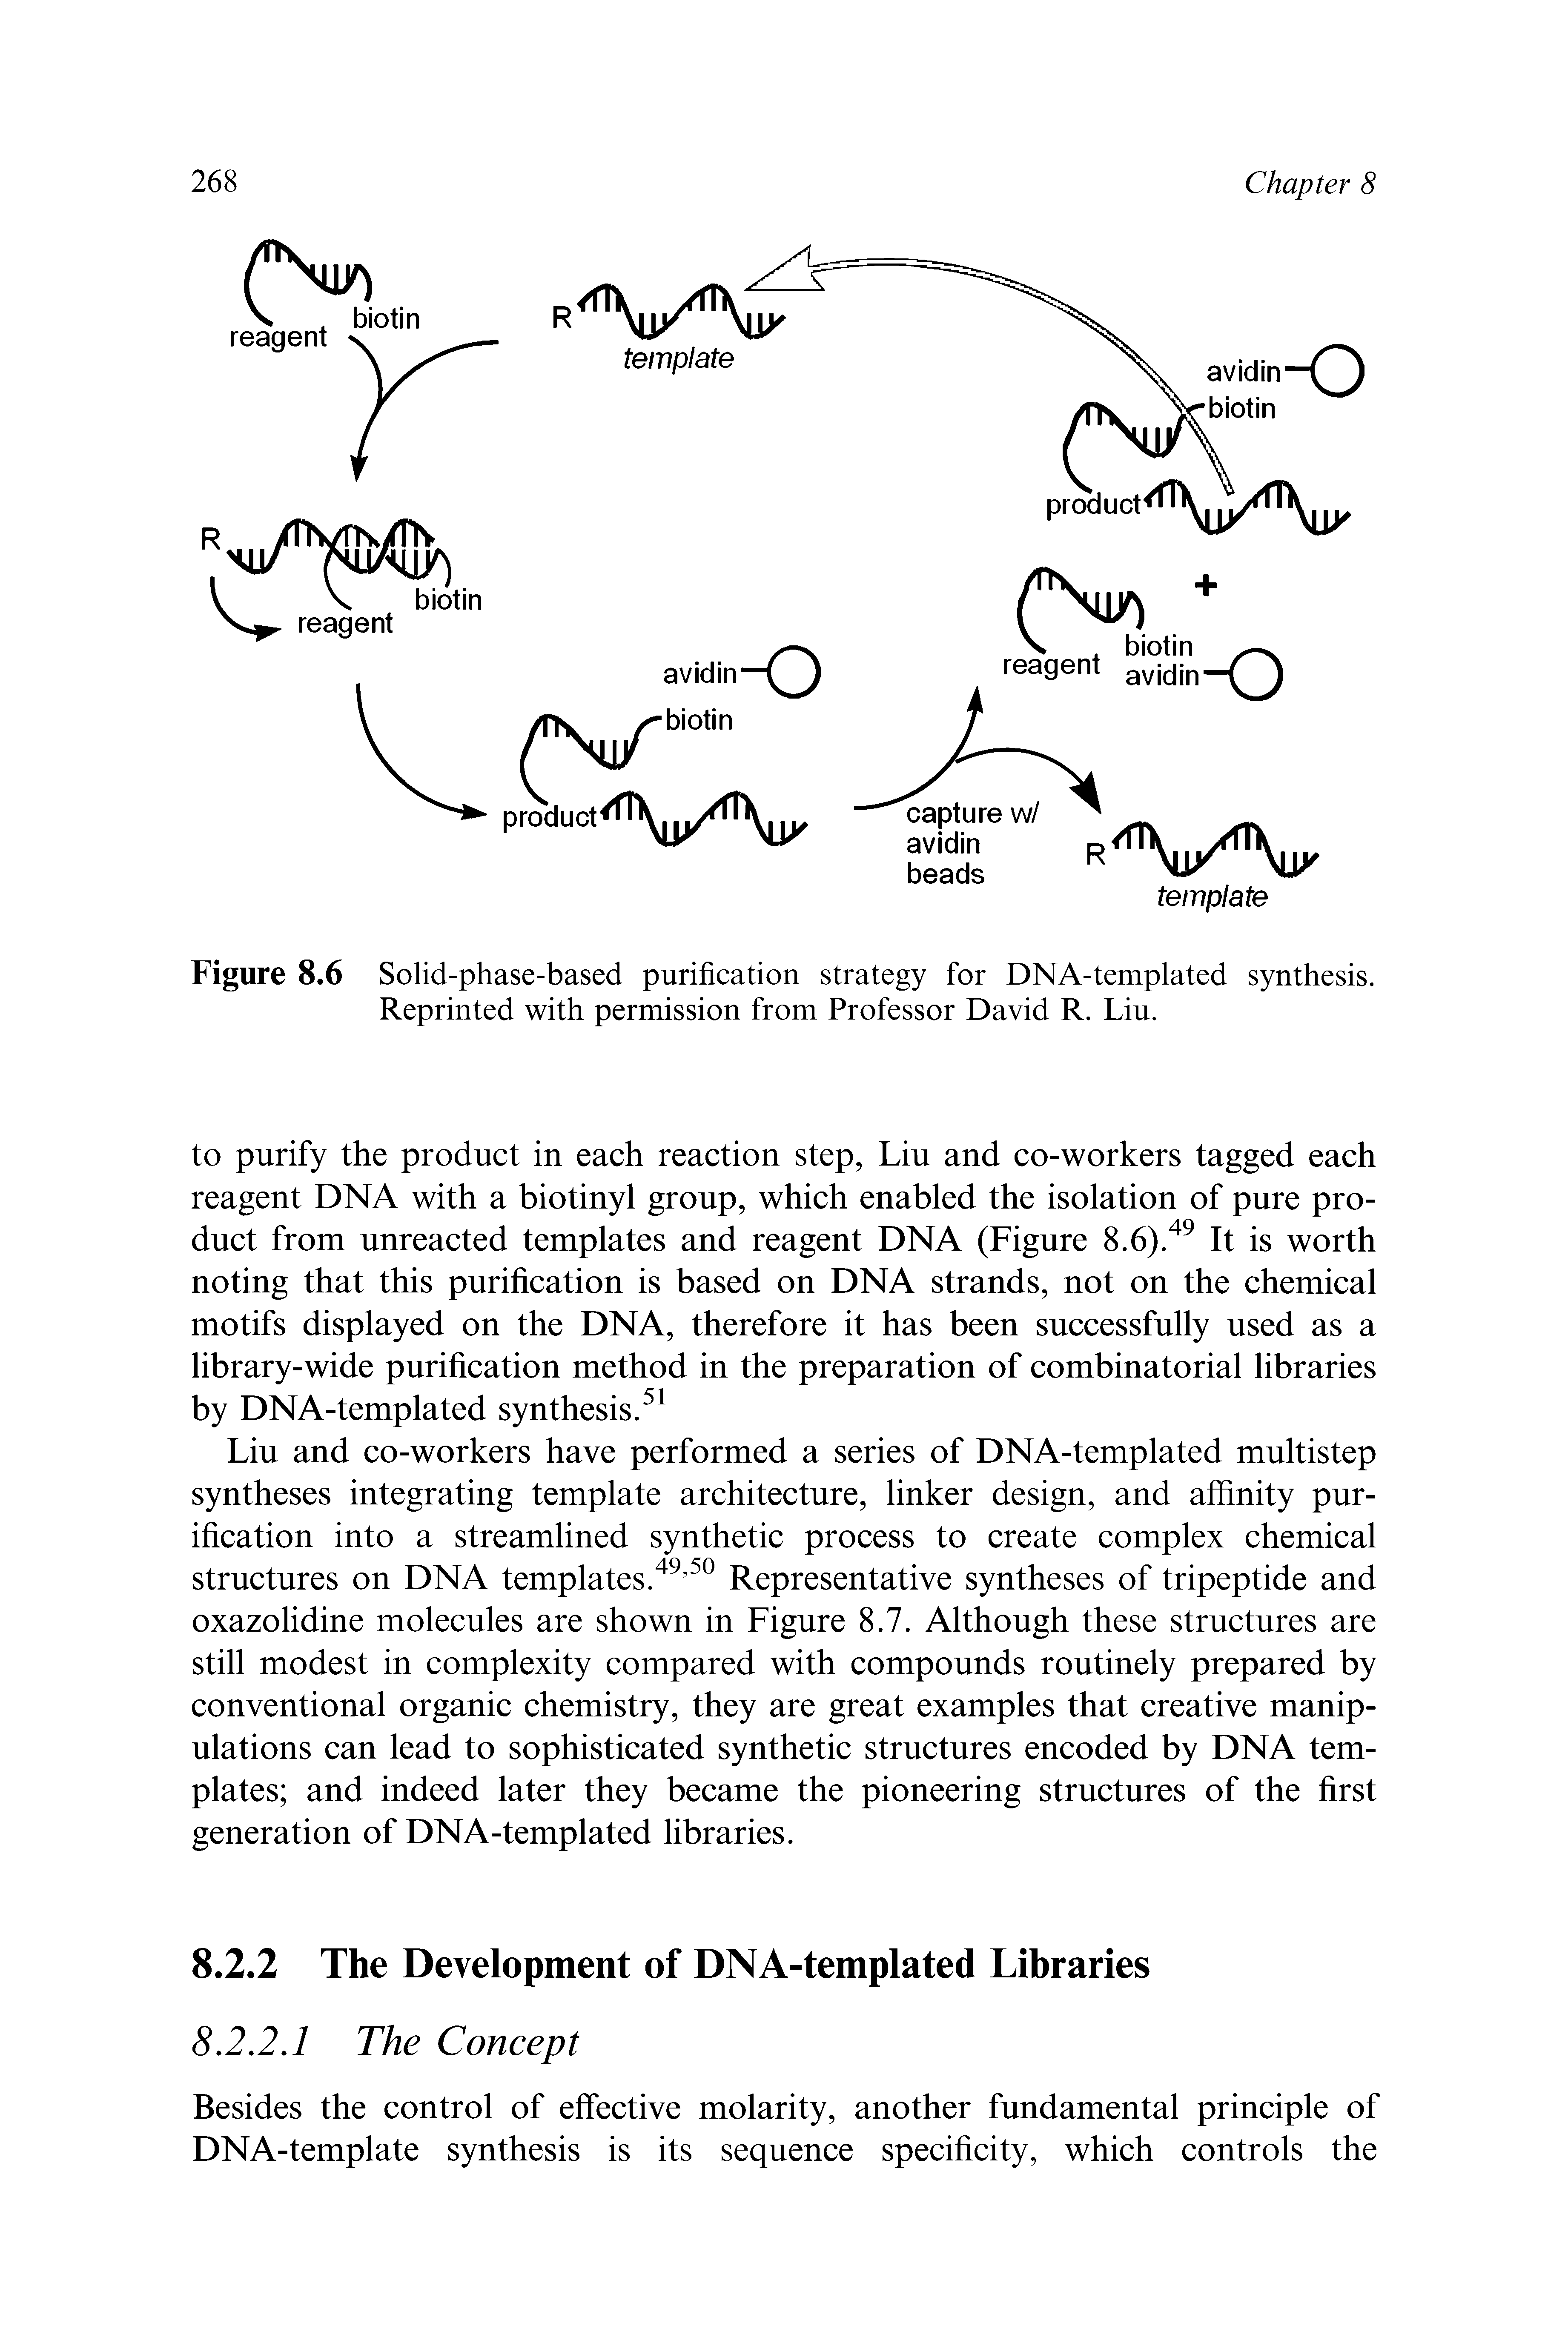 Figure 8.6 Solid-phase-based purification strategy for DNA-templated synthesis. Reprinted with permission from Professor David R. Liu.